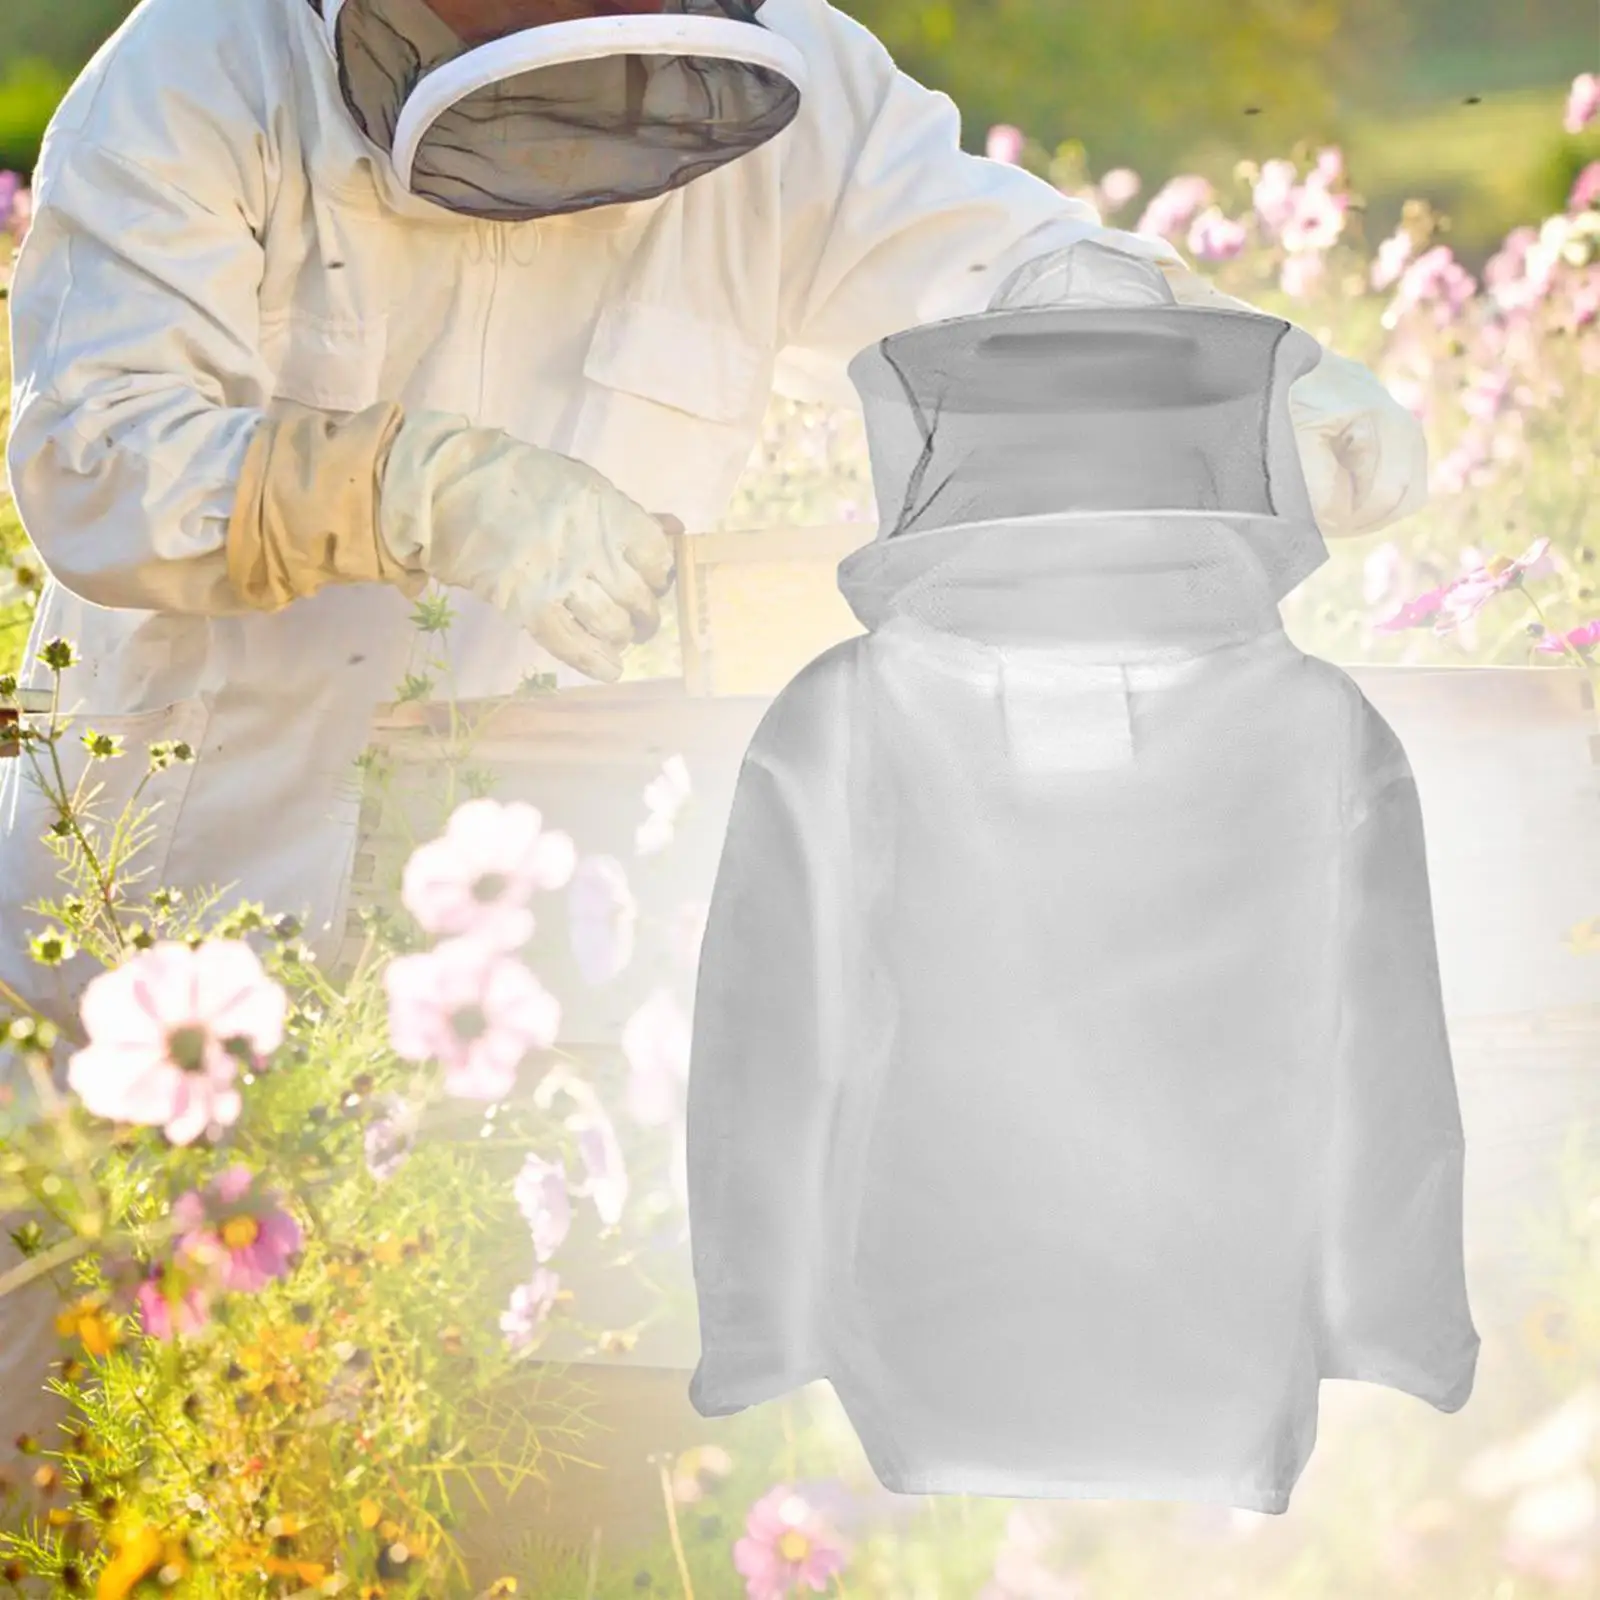 Bee Keeper Suit Durable Ventilated Beekeeping Suit for Commercial Beekeepers